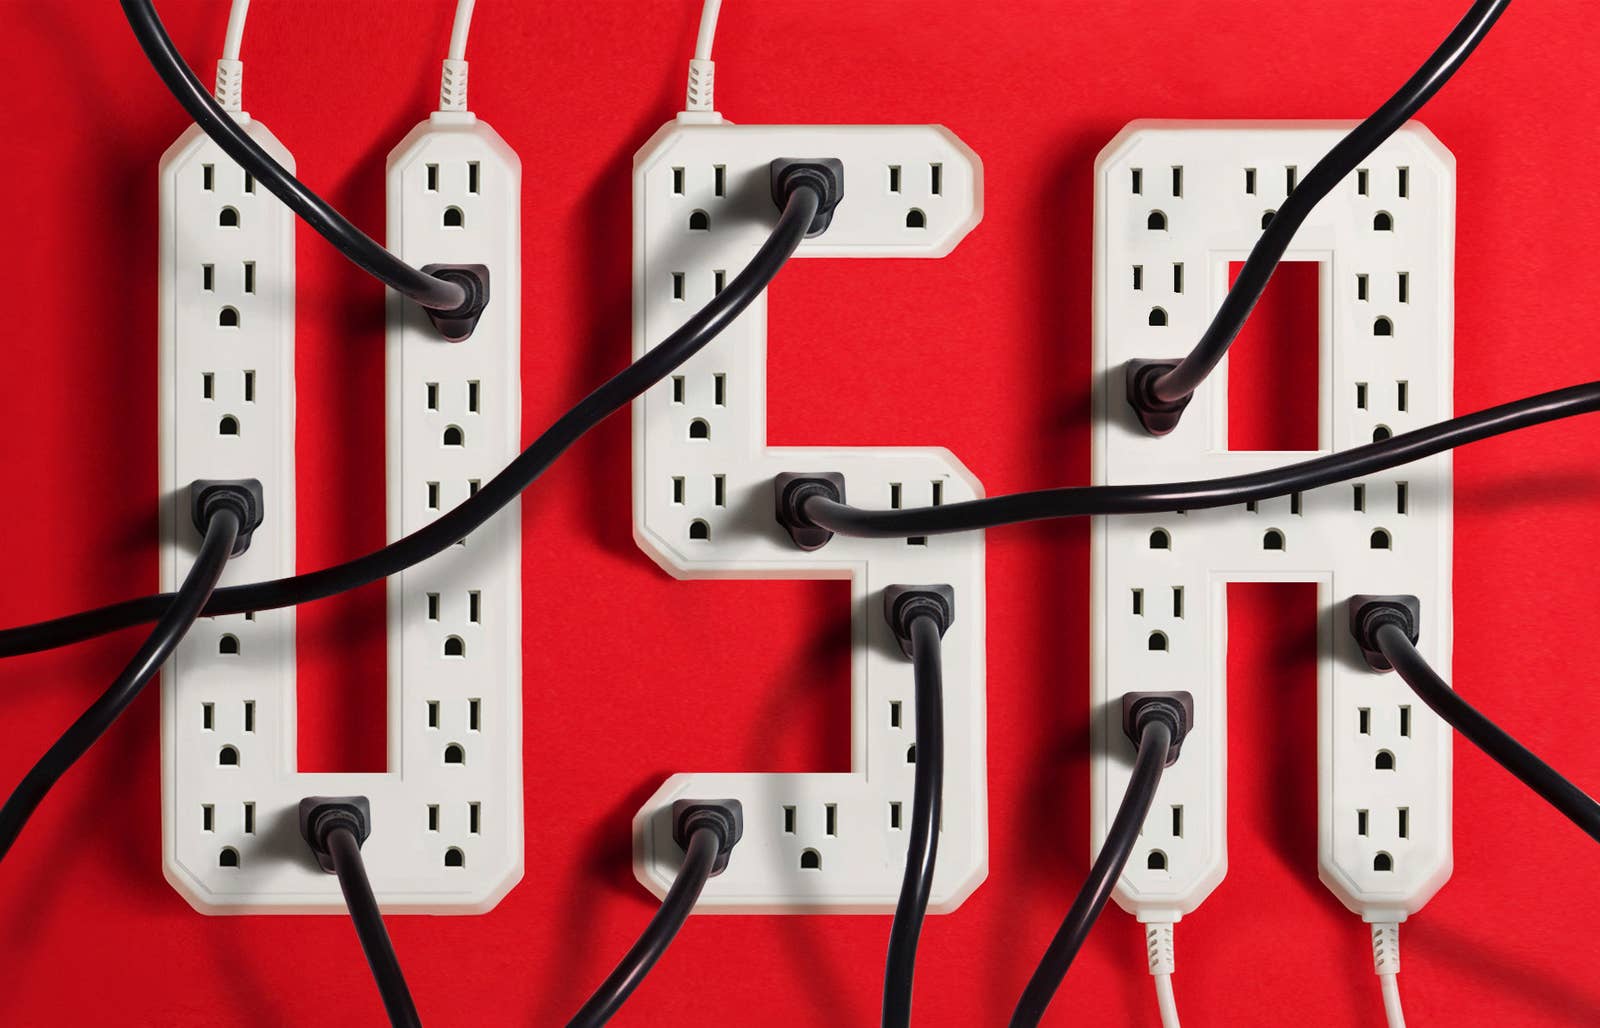 An illustration of power strips modified to spell &quot;USA&quot; with lots of plugs coming out in various directions